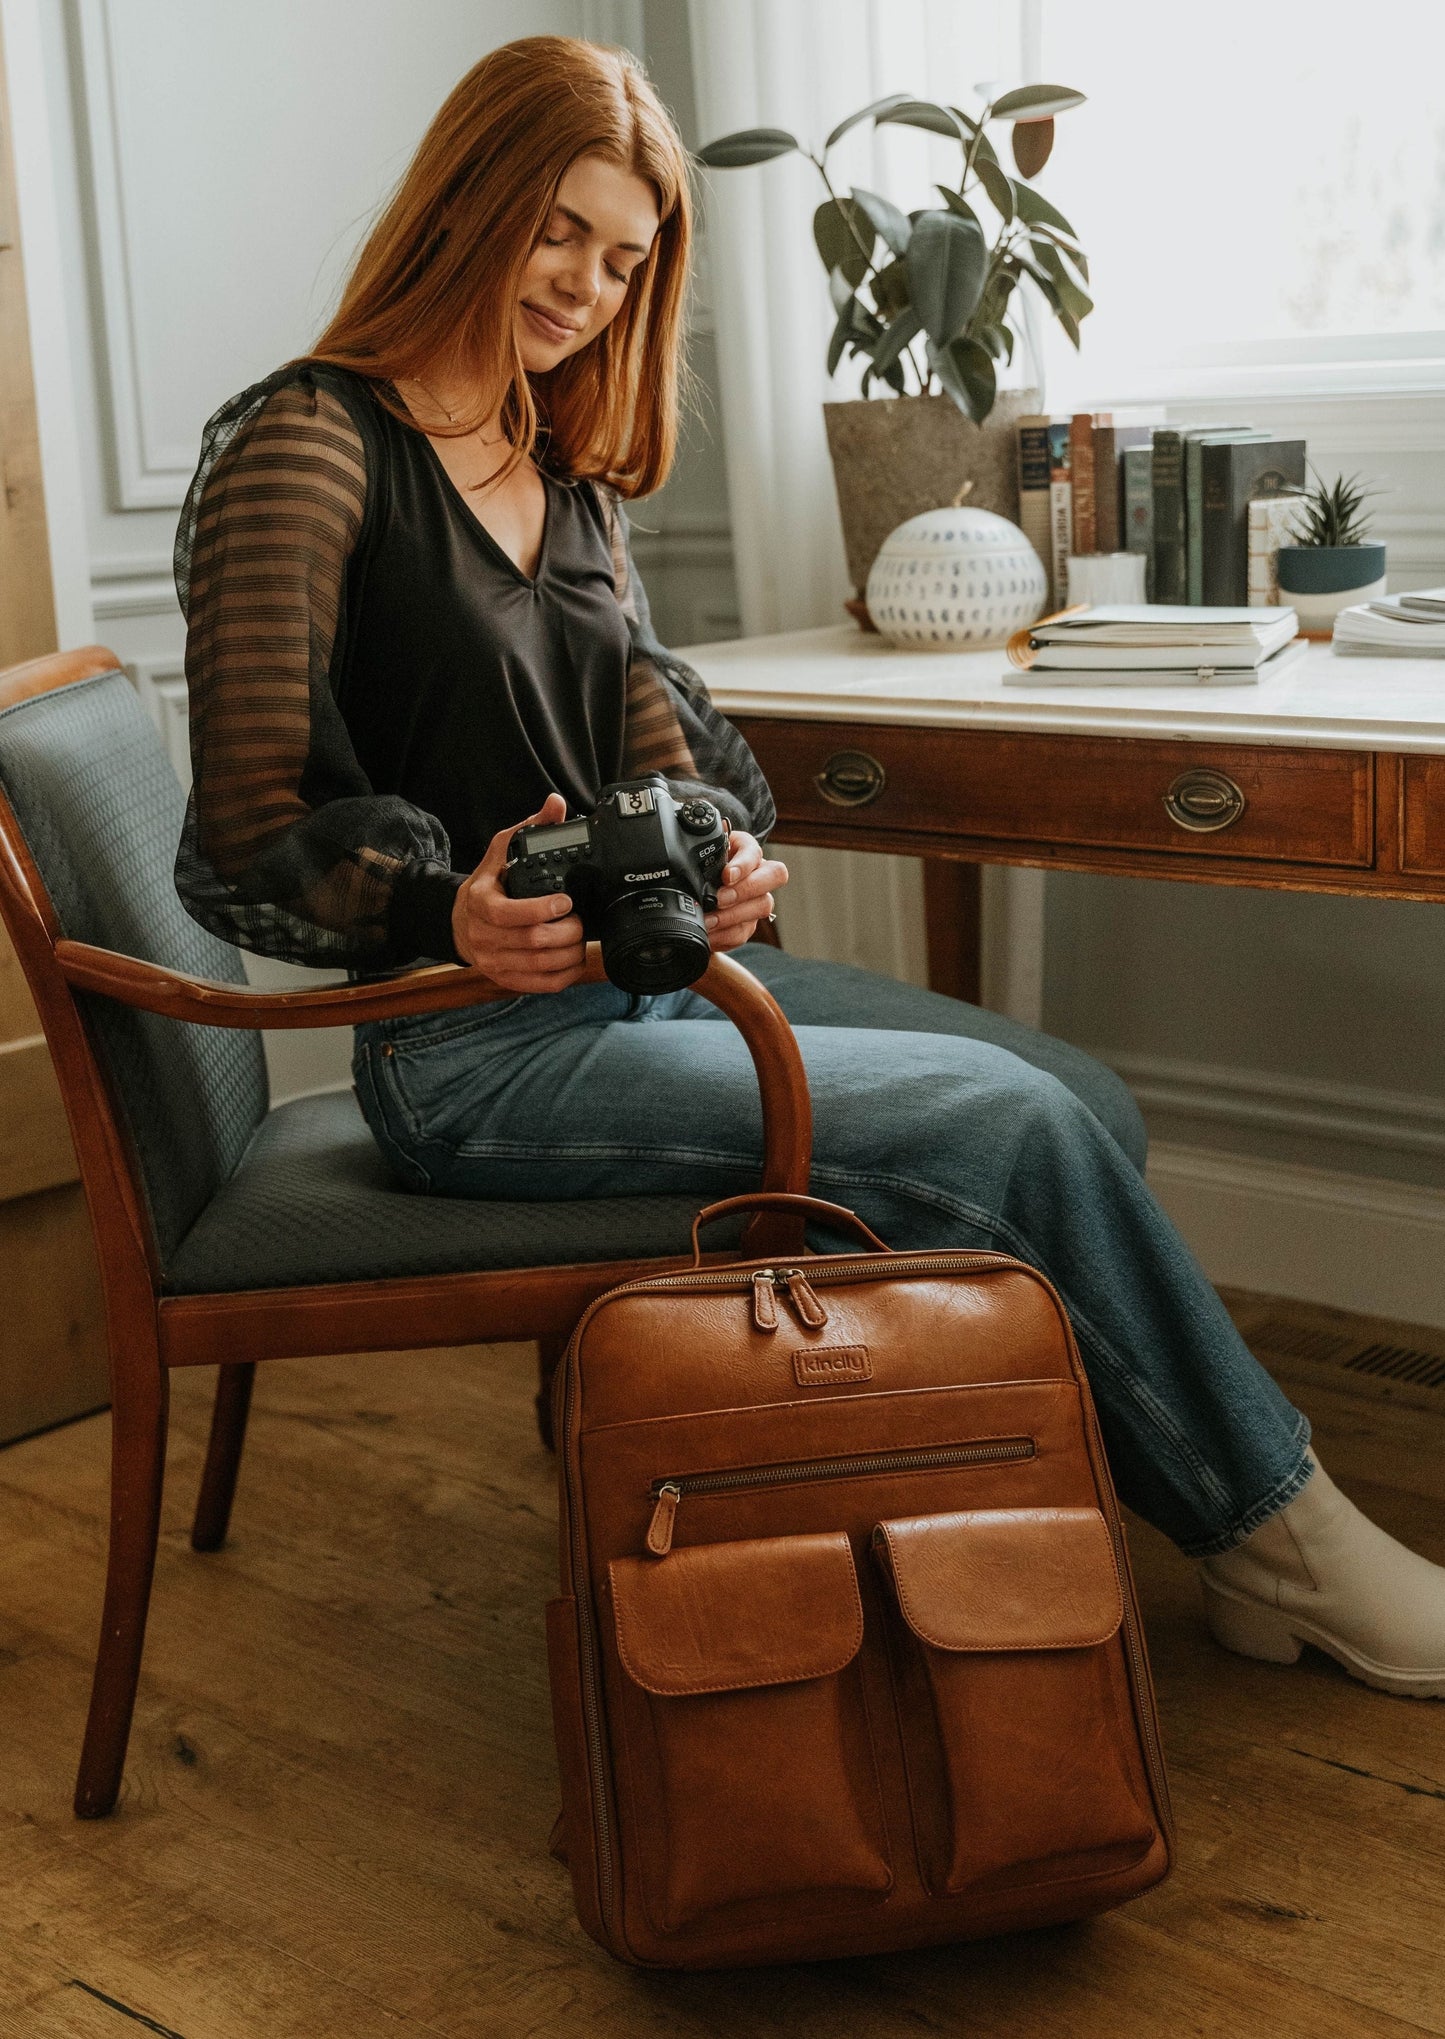 The Jenessa - Our Full Size Camera Backpack (BLACK is a pre-order for late October Shipping)